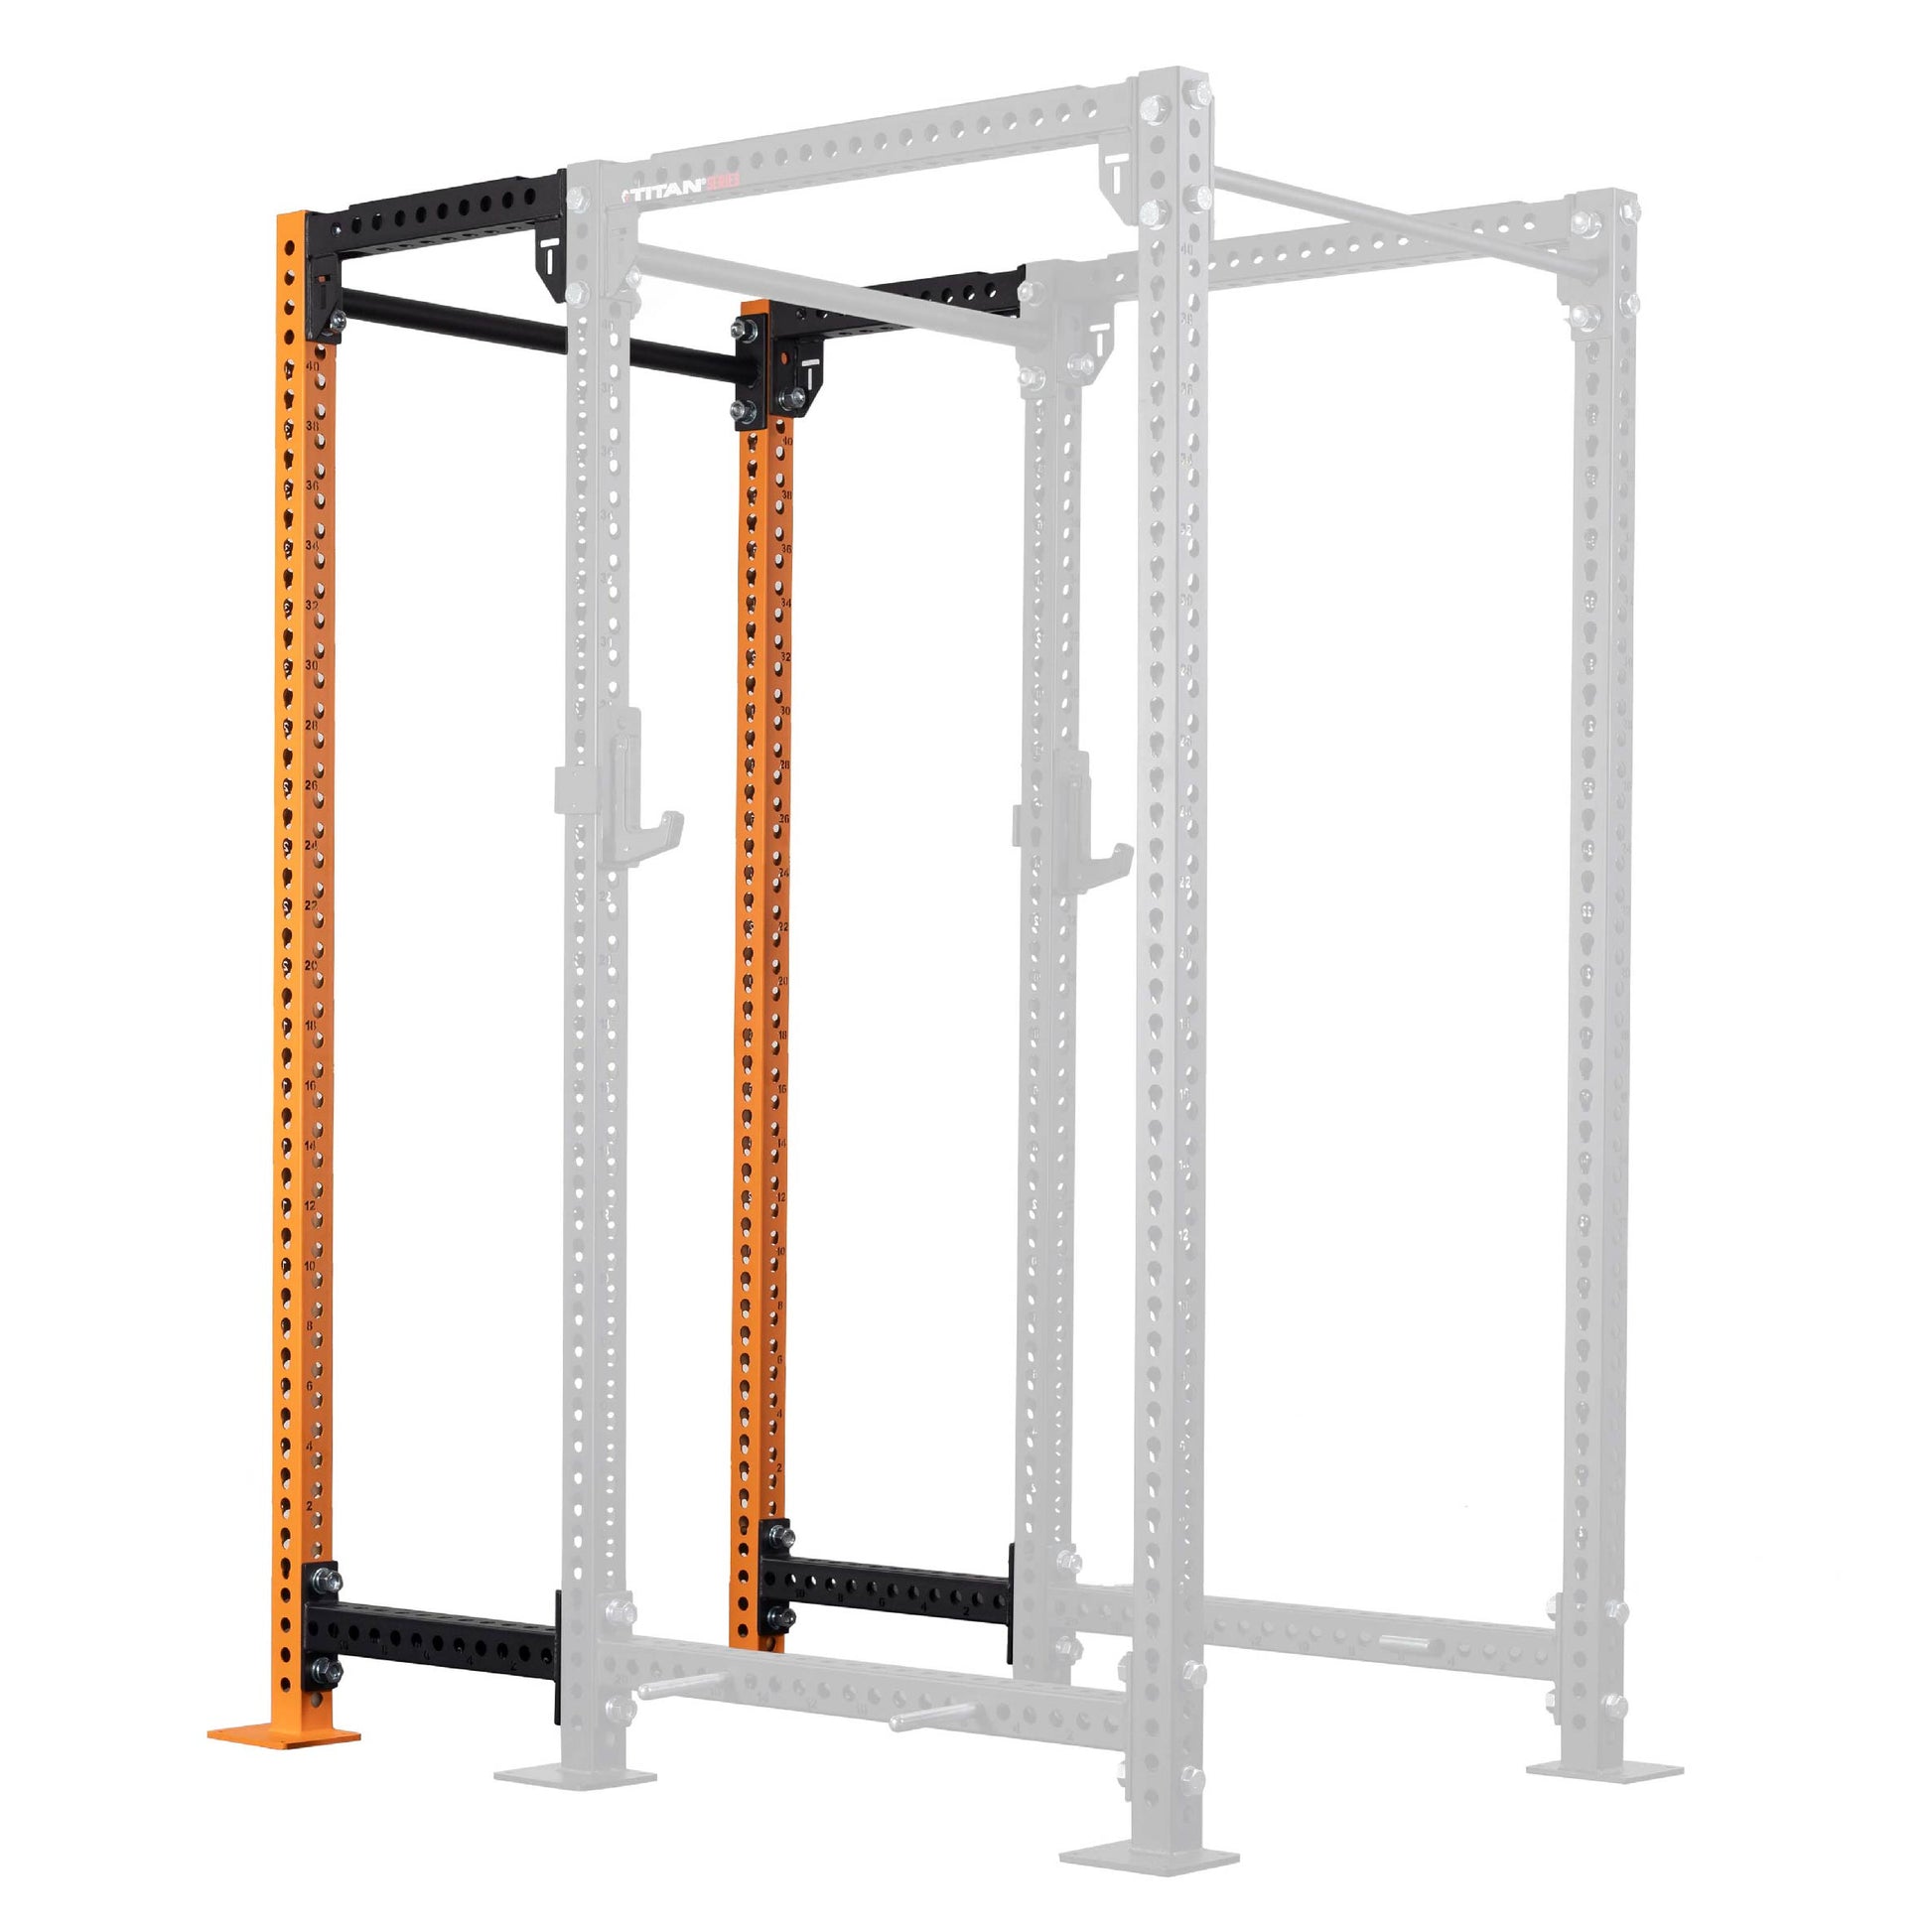 TITAN Series 24" Extension Kit - Extension Color: Orange - Extension Height: 100" - Crossmember: 2" Fat Pull-Up Bar | Orange / 100" / 2" Fat Pull-Up Bar